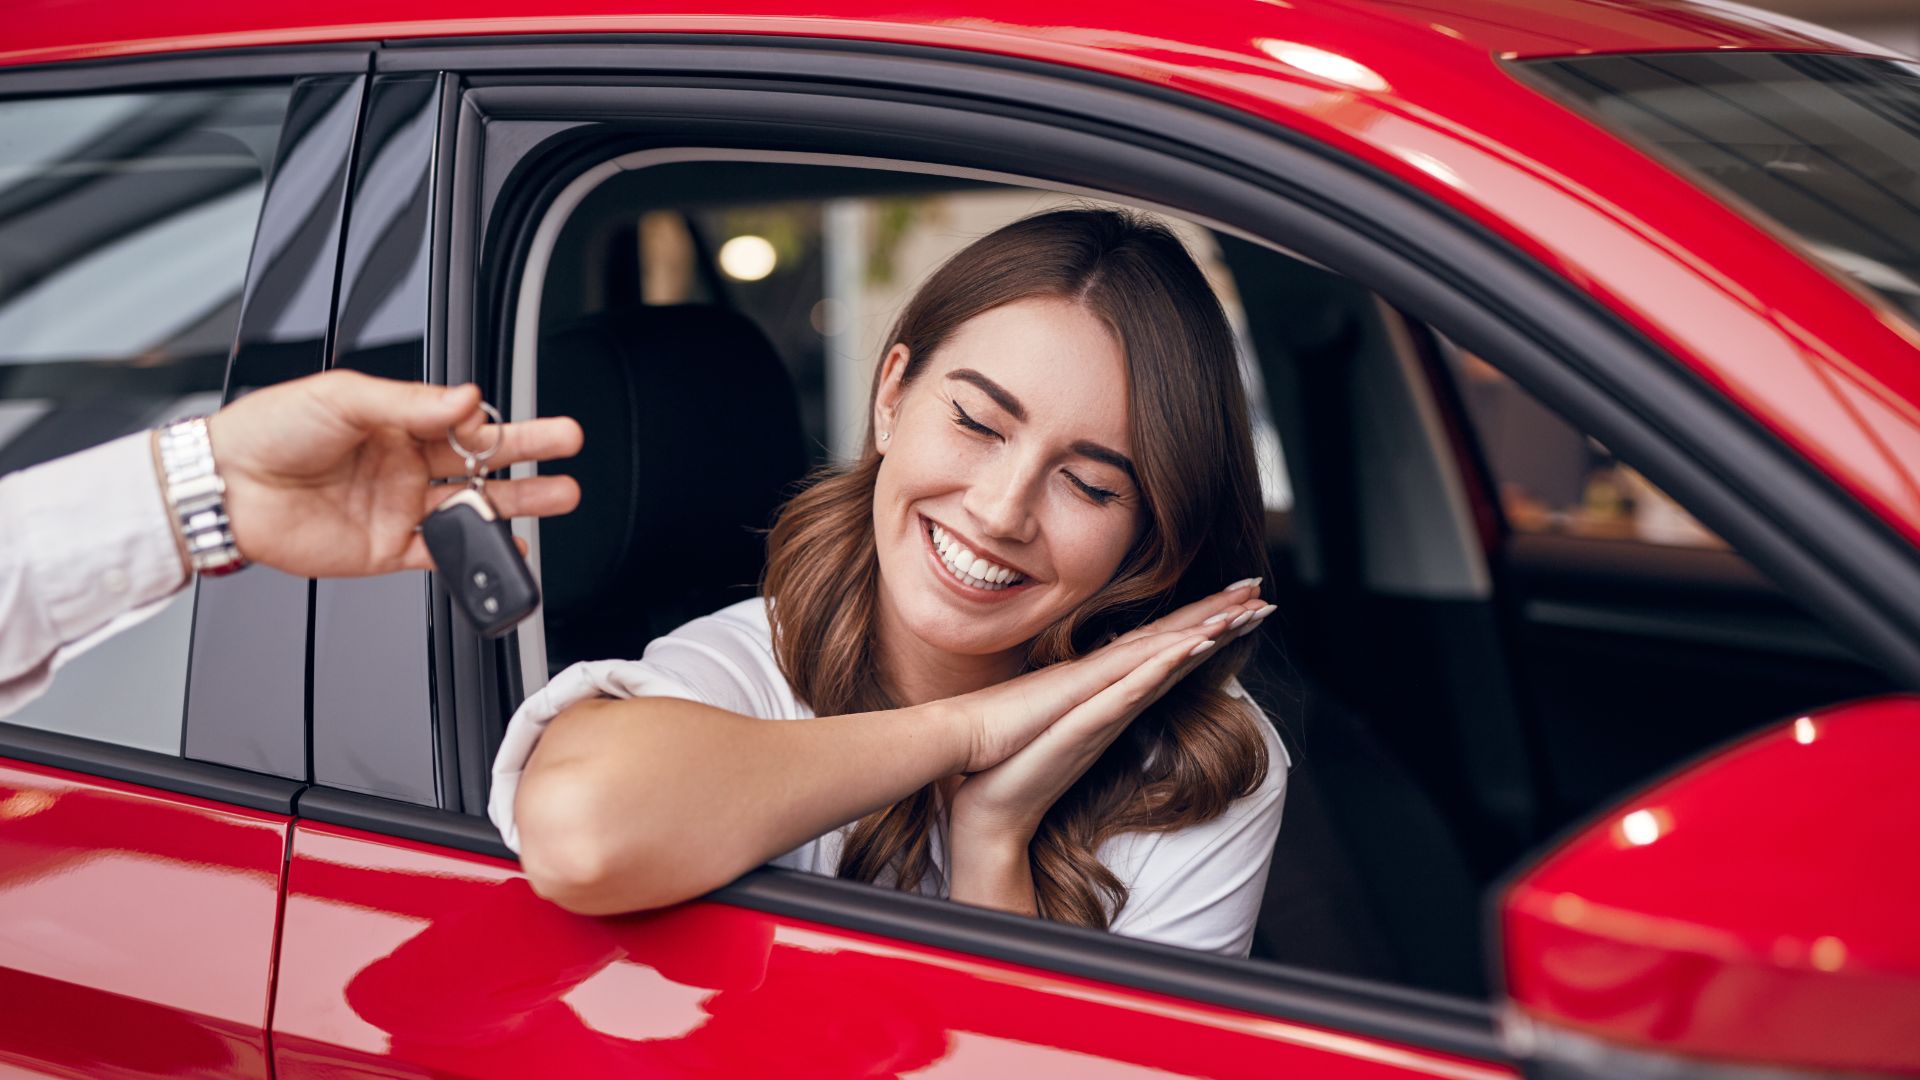 a woman is smiling while sitting in a red car.